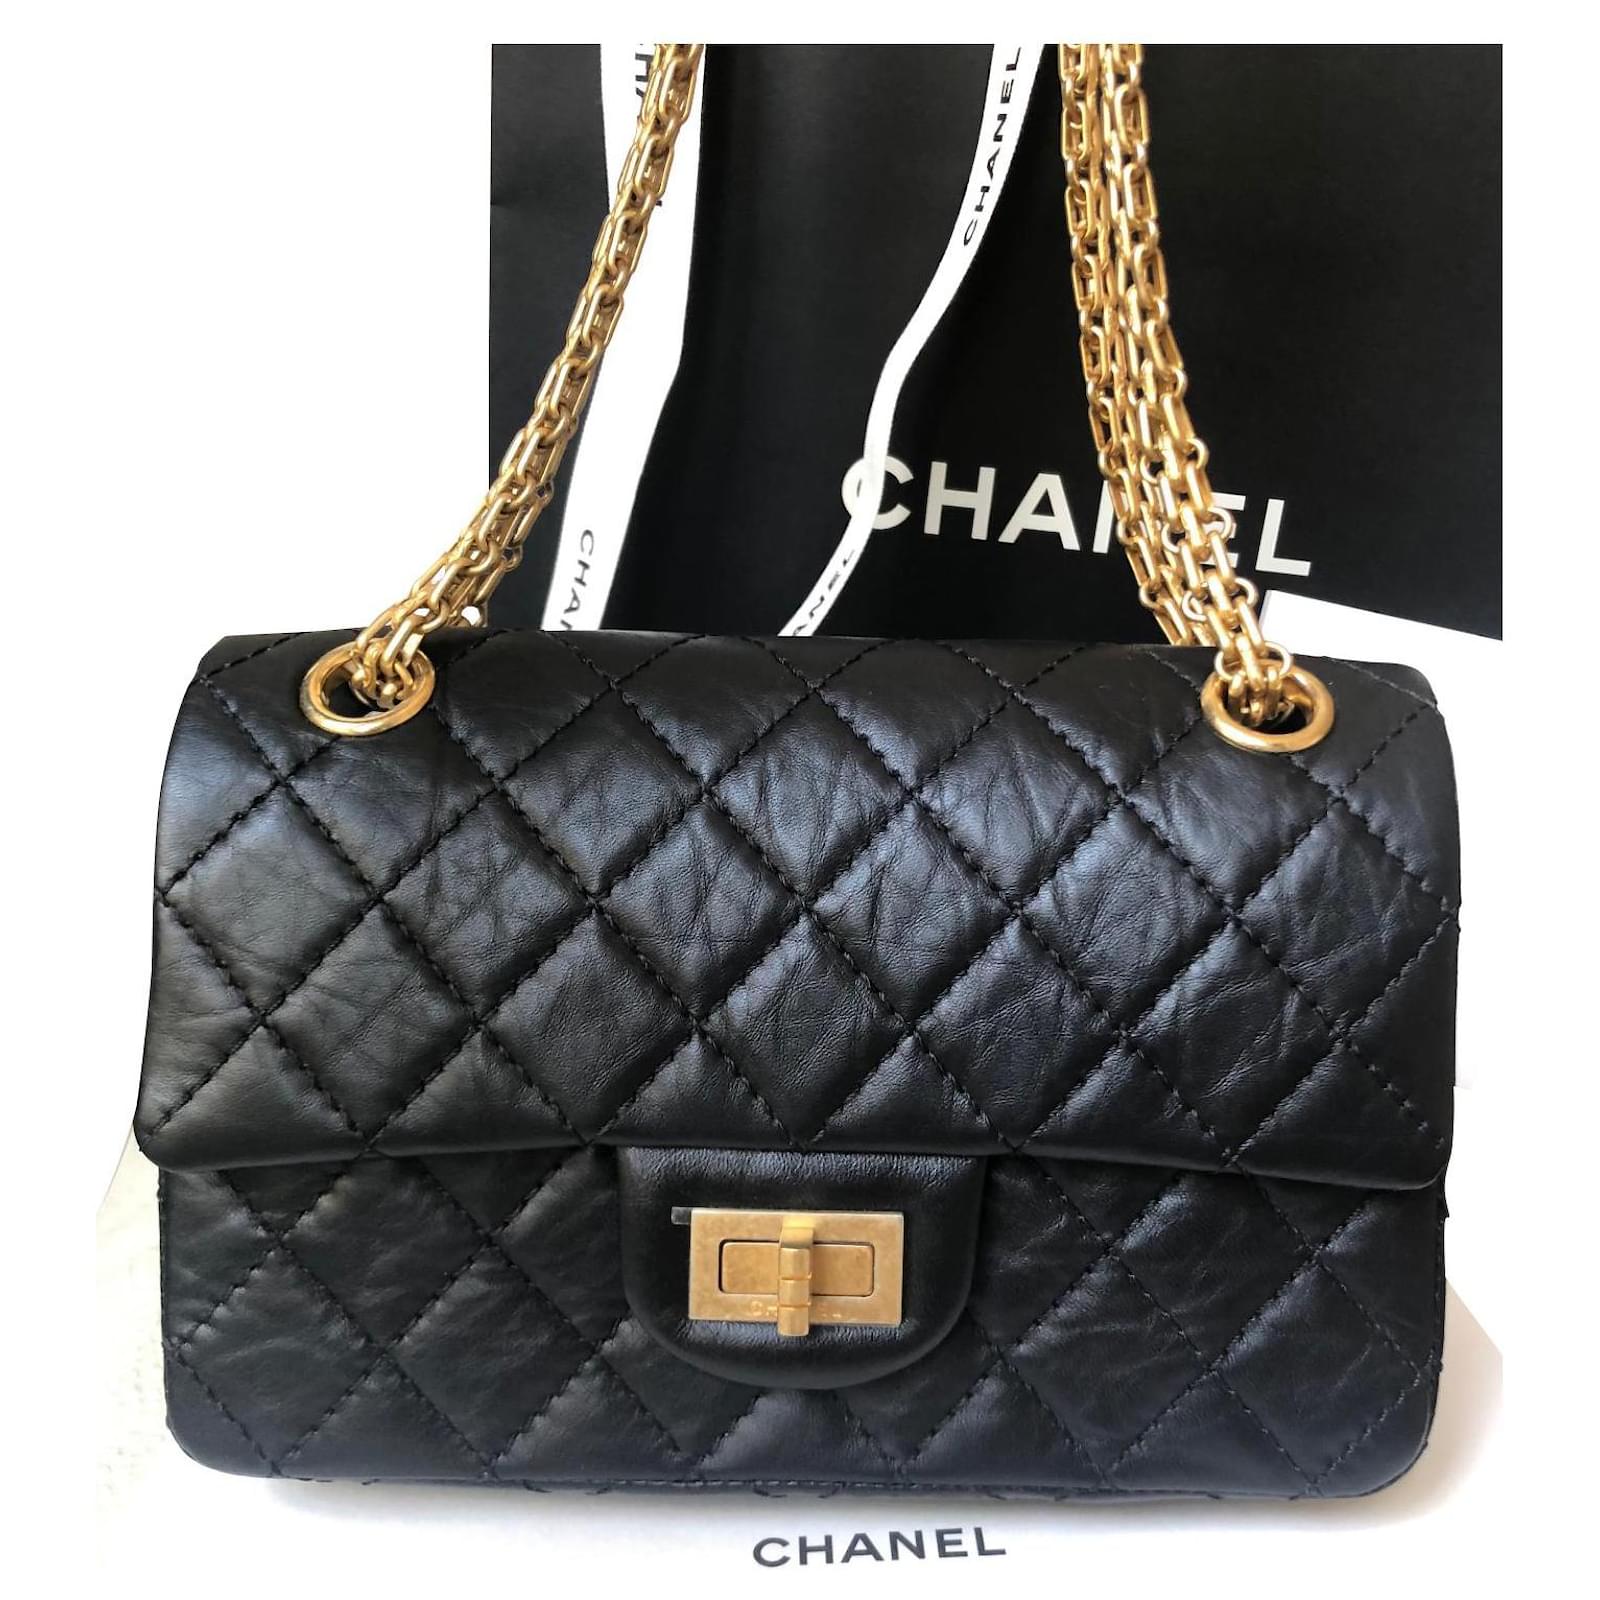 CHANEL 2.55 MINI bag review - first edition with black calfskin